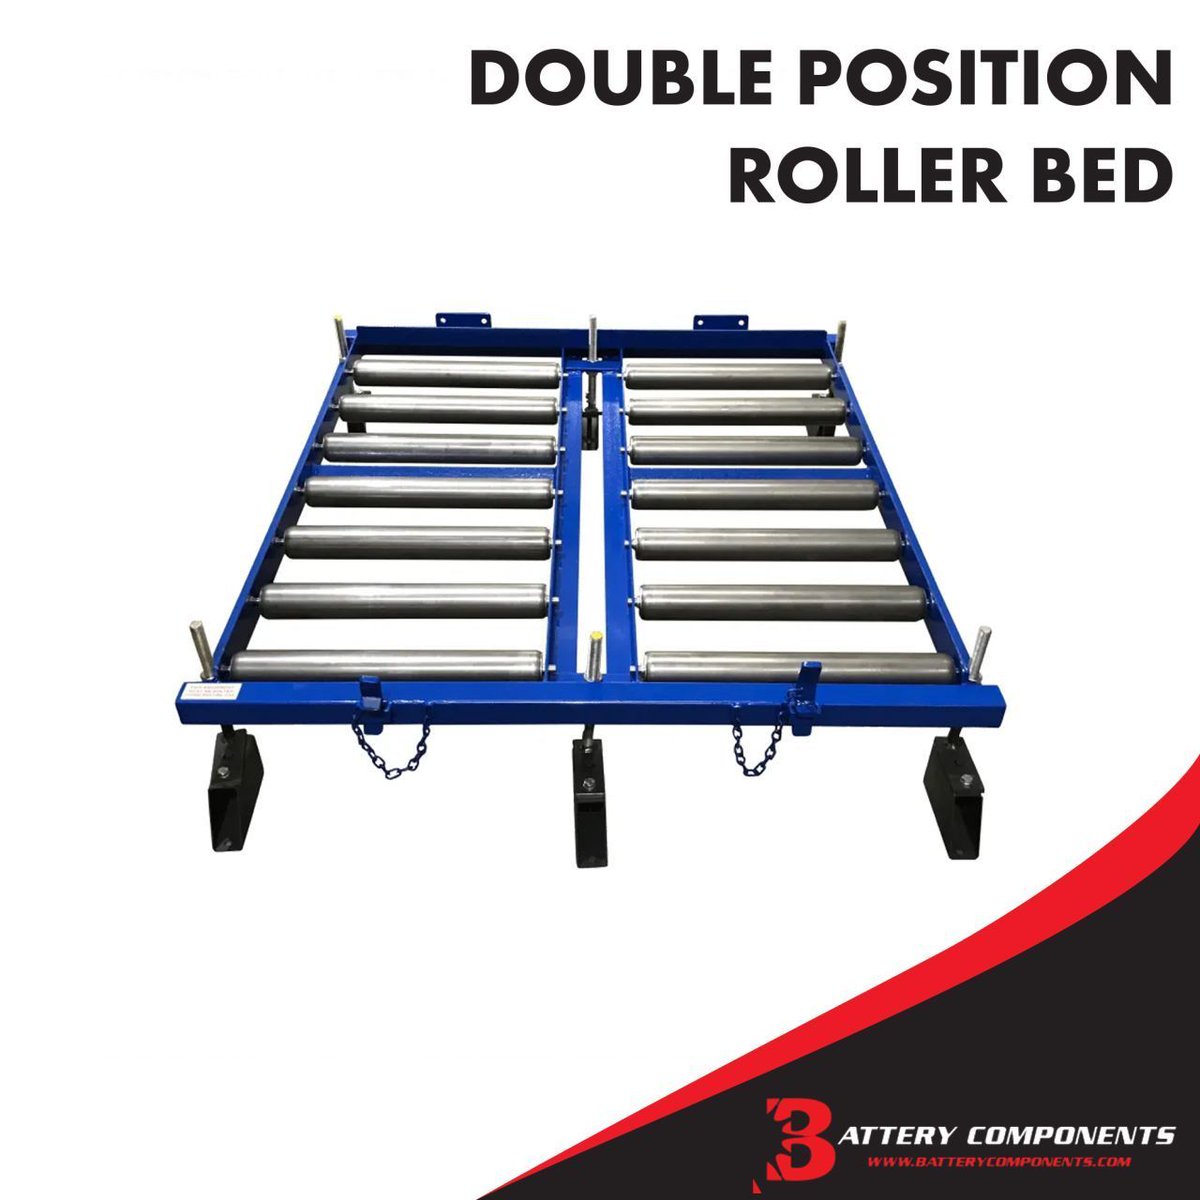 Shop our Double Position Roller Beds for quicker and easier battery changes. 

They are compatible with a range of batteries so you can ensure your fleet is taken care of. 

Order now:
buff.ly/3Ua53k1 

#BatteryComponents #BatteryHandling #BatteryMaintenance